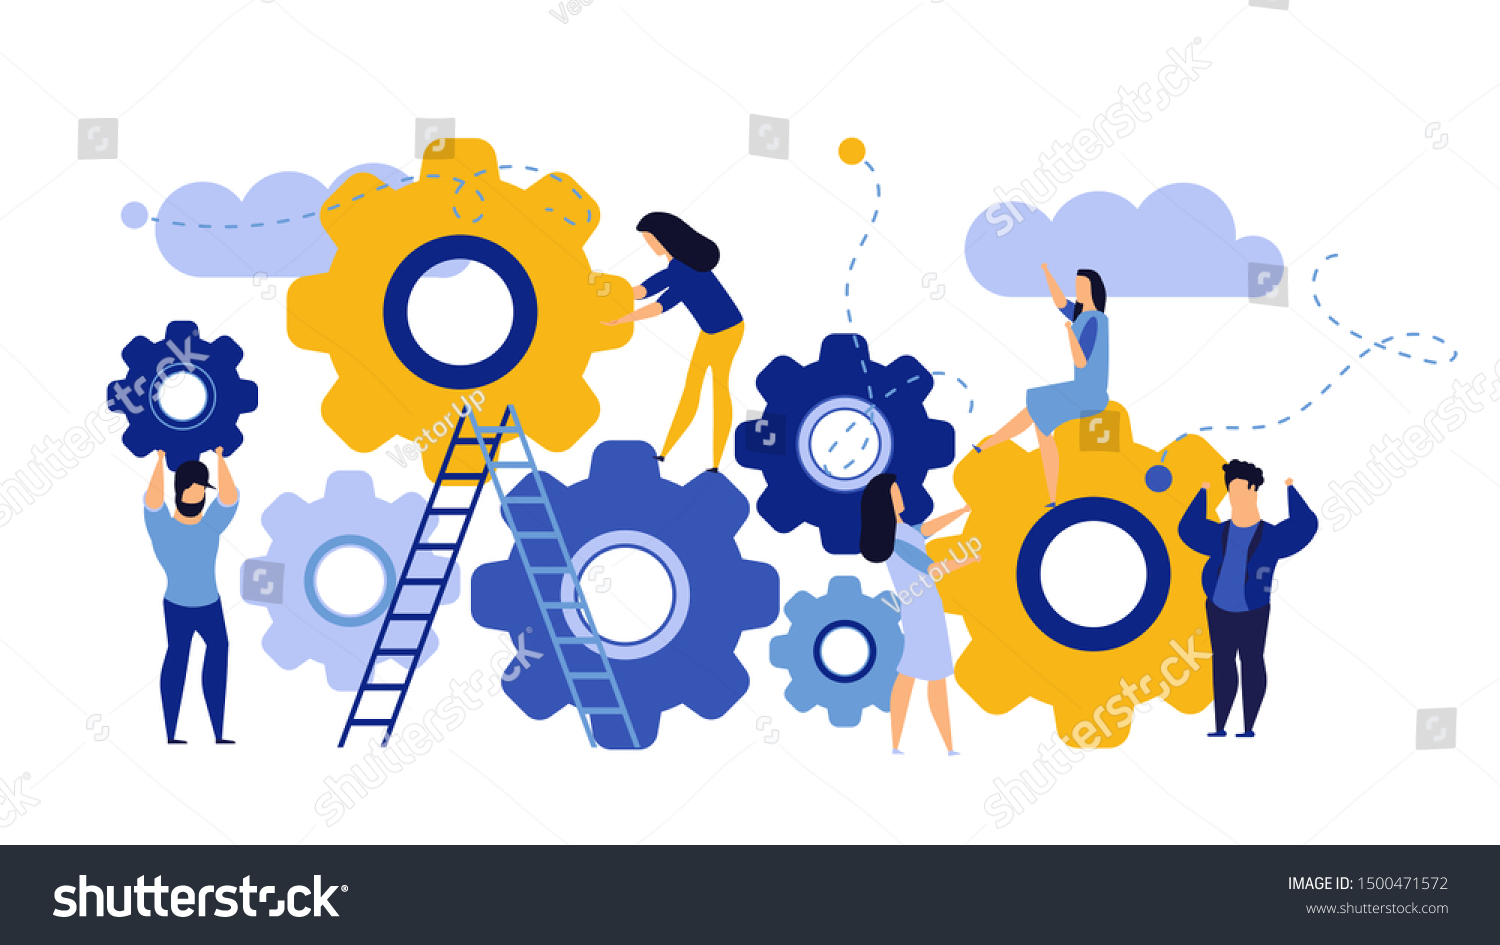 Man and woman business organization with circle gear vector concept illustration mechanism teamwork. Skill job cooperation coworker person. Group company process development structure workforce banner #1500471572